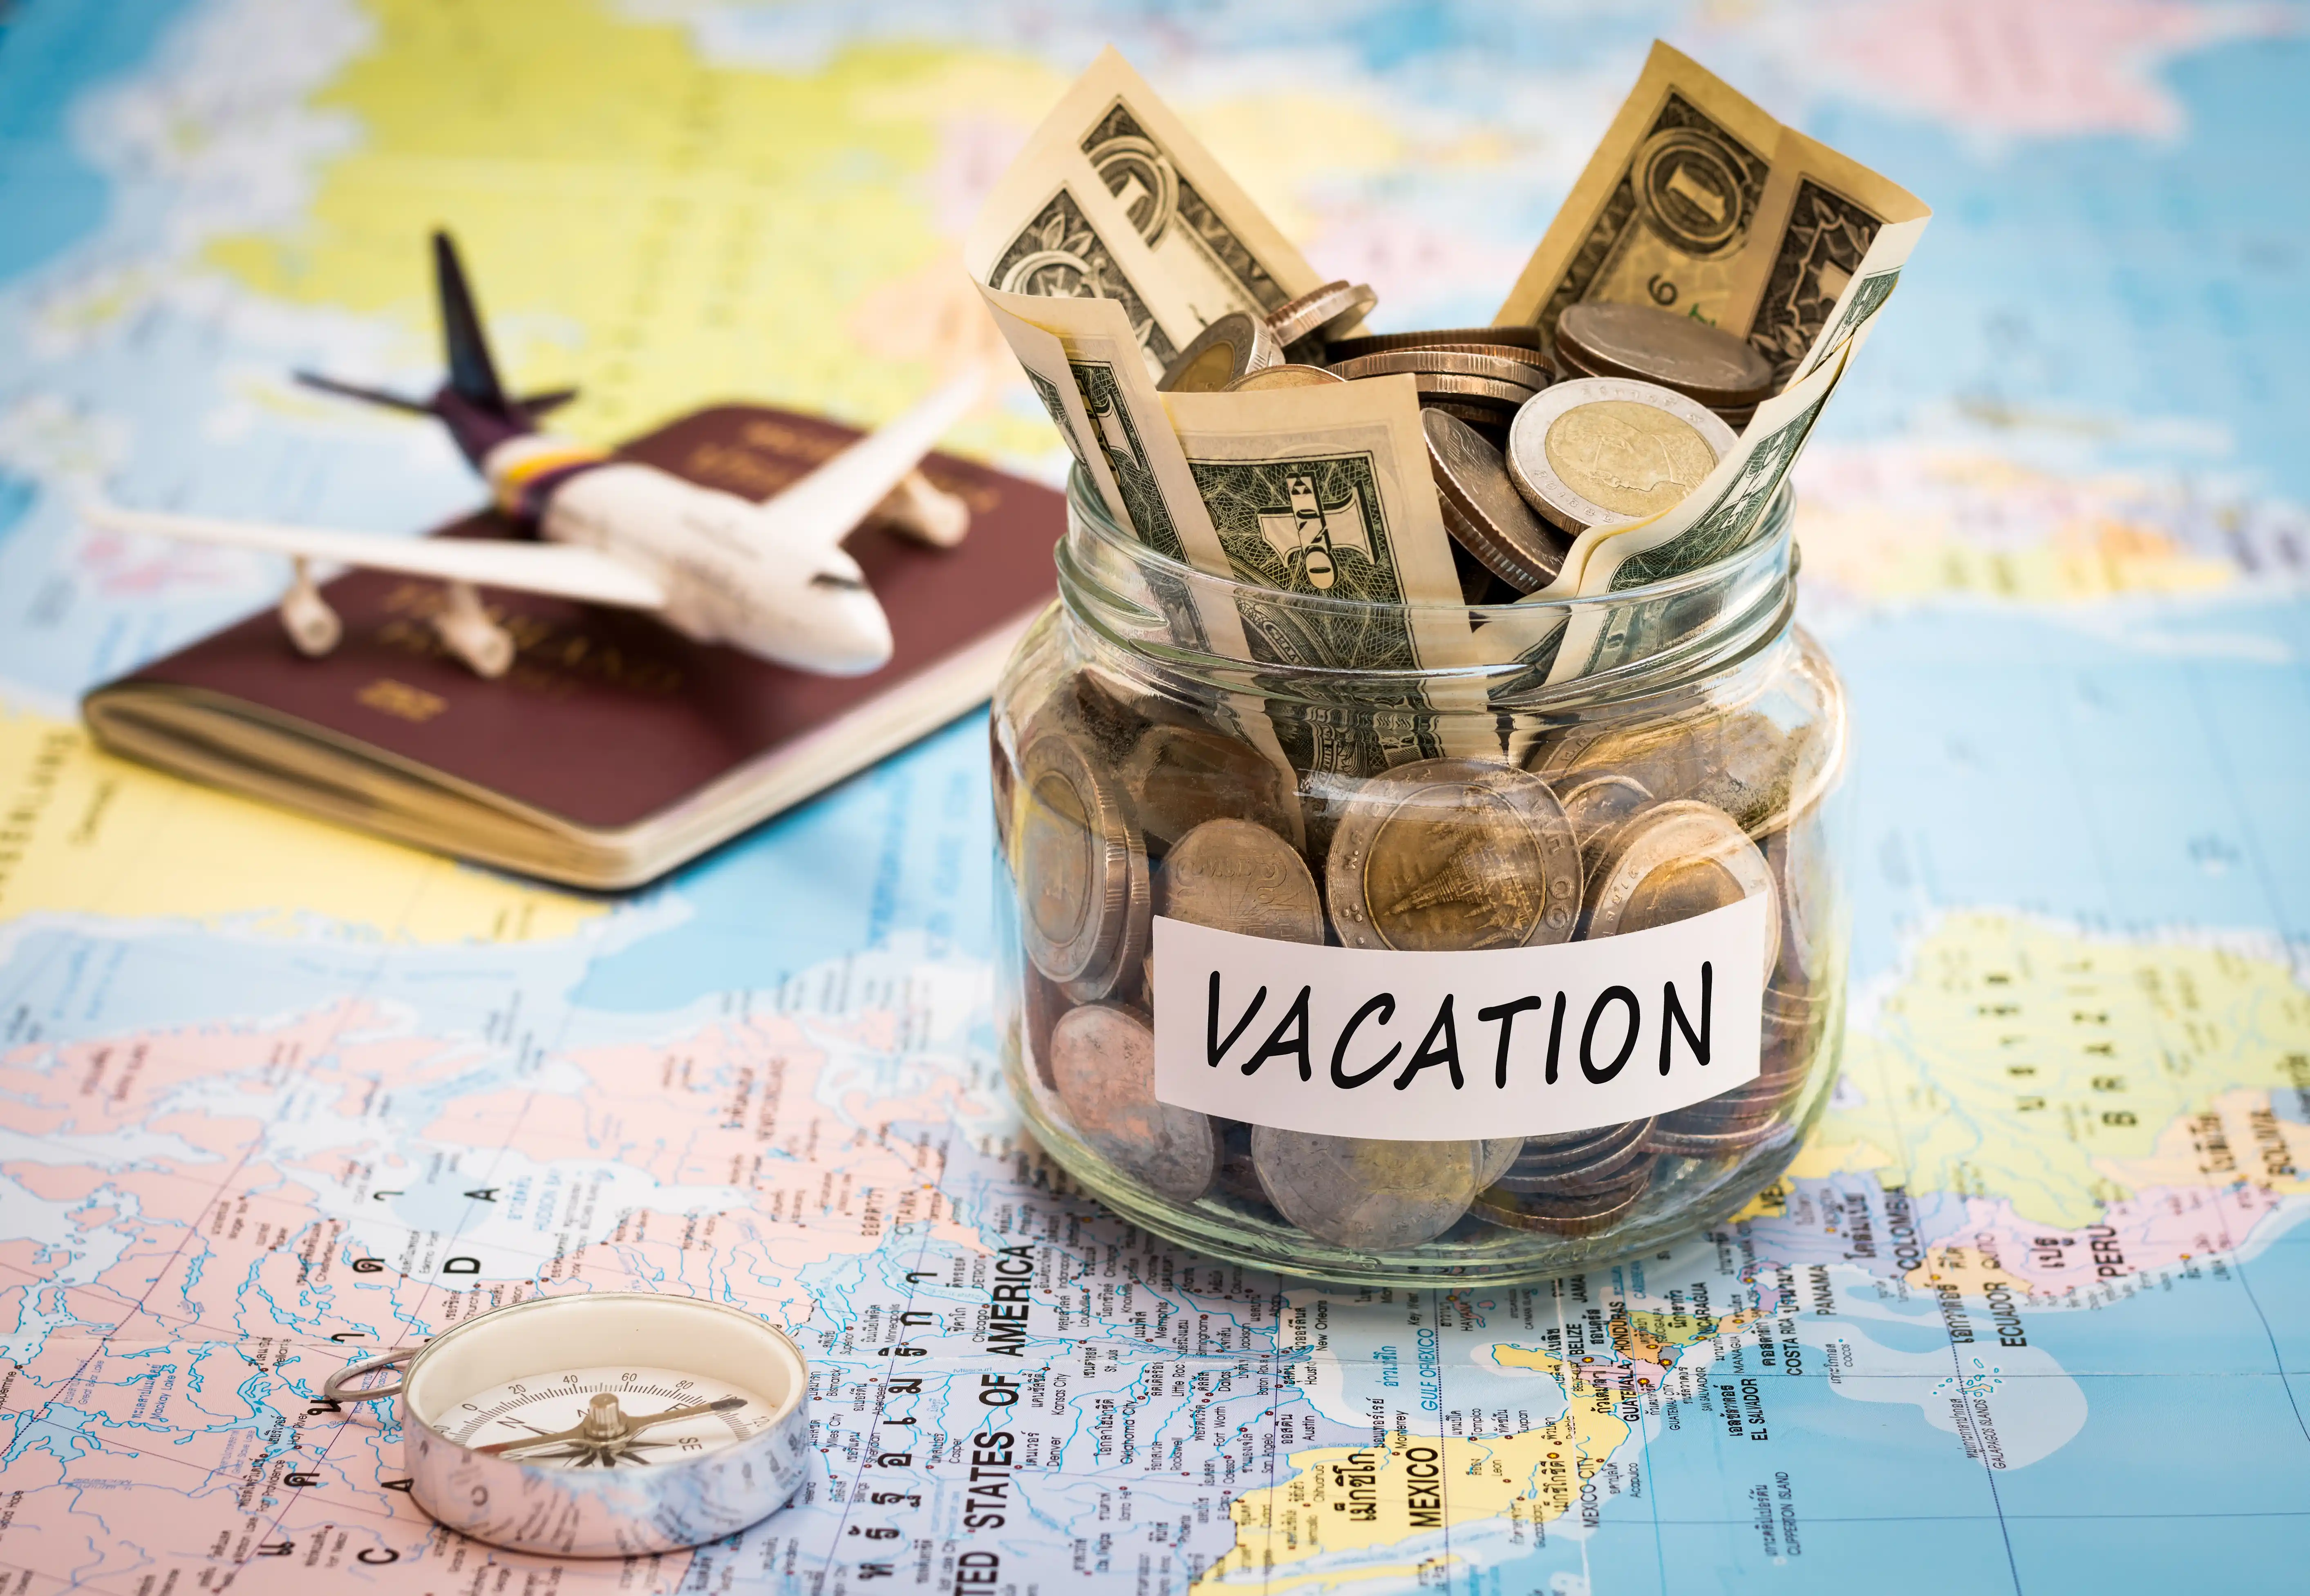 How To Plan a Trip On a Budget | WalletGenius